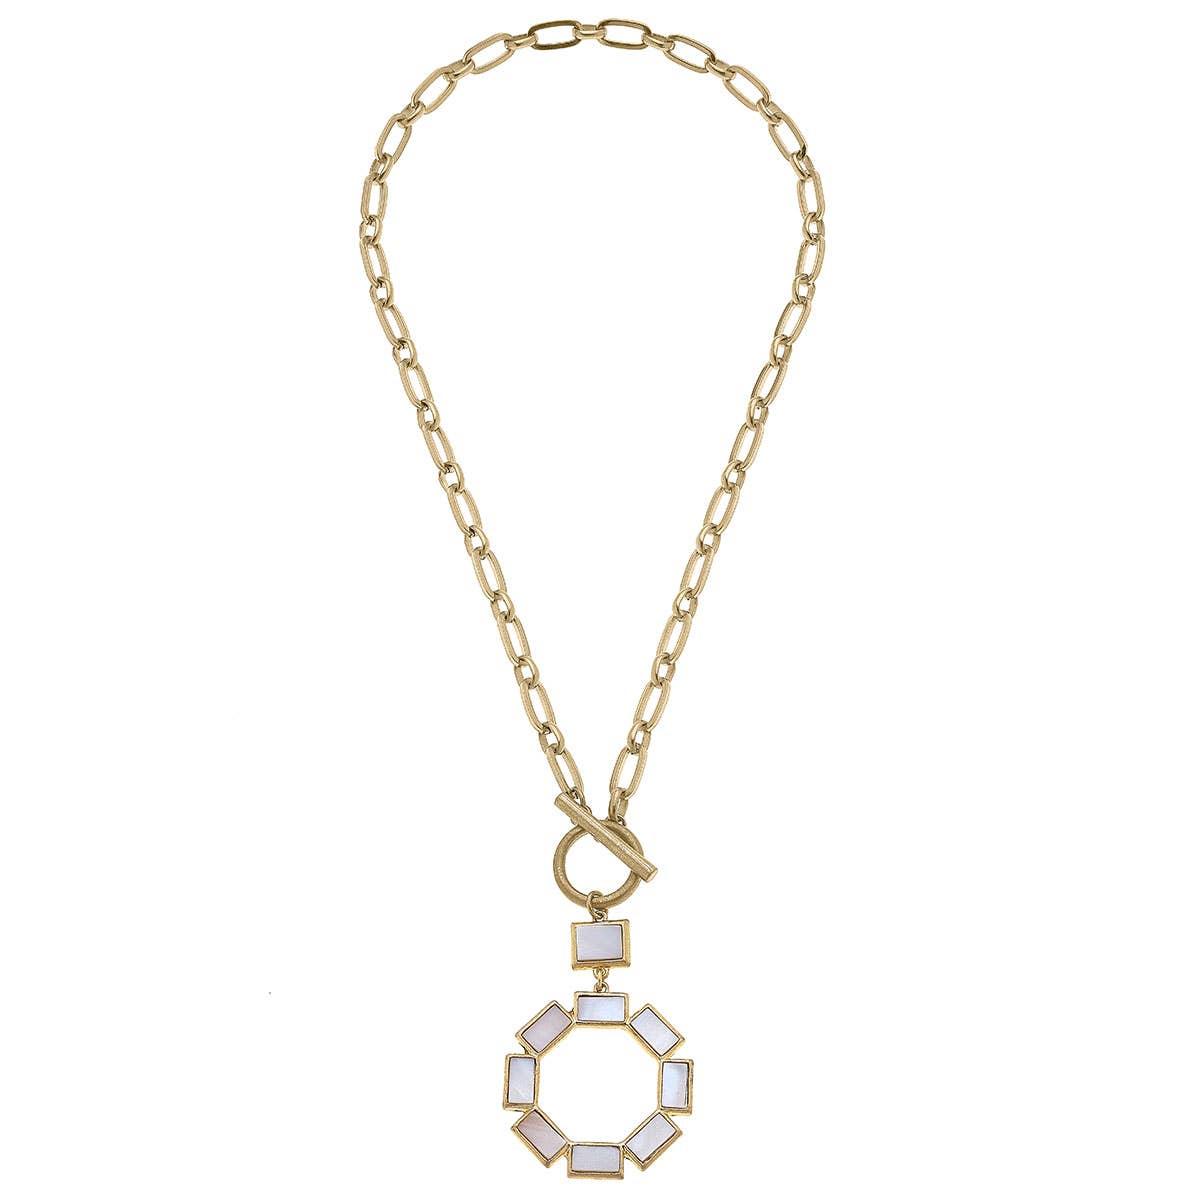 Halston Mother of Pearl Toggle Necklace in Worn Gold